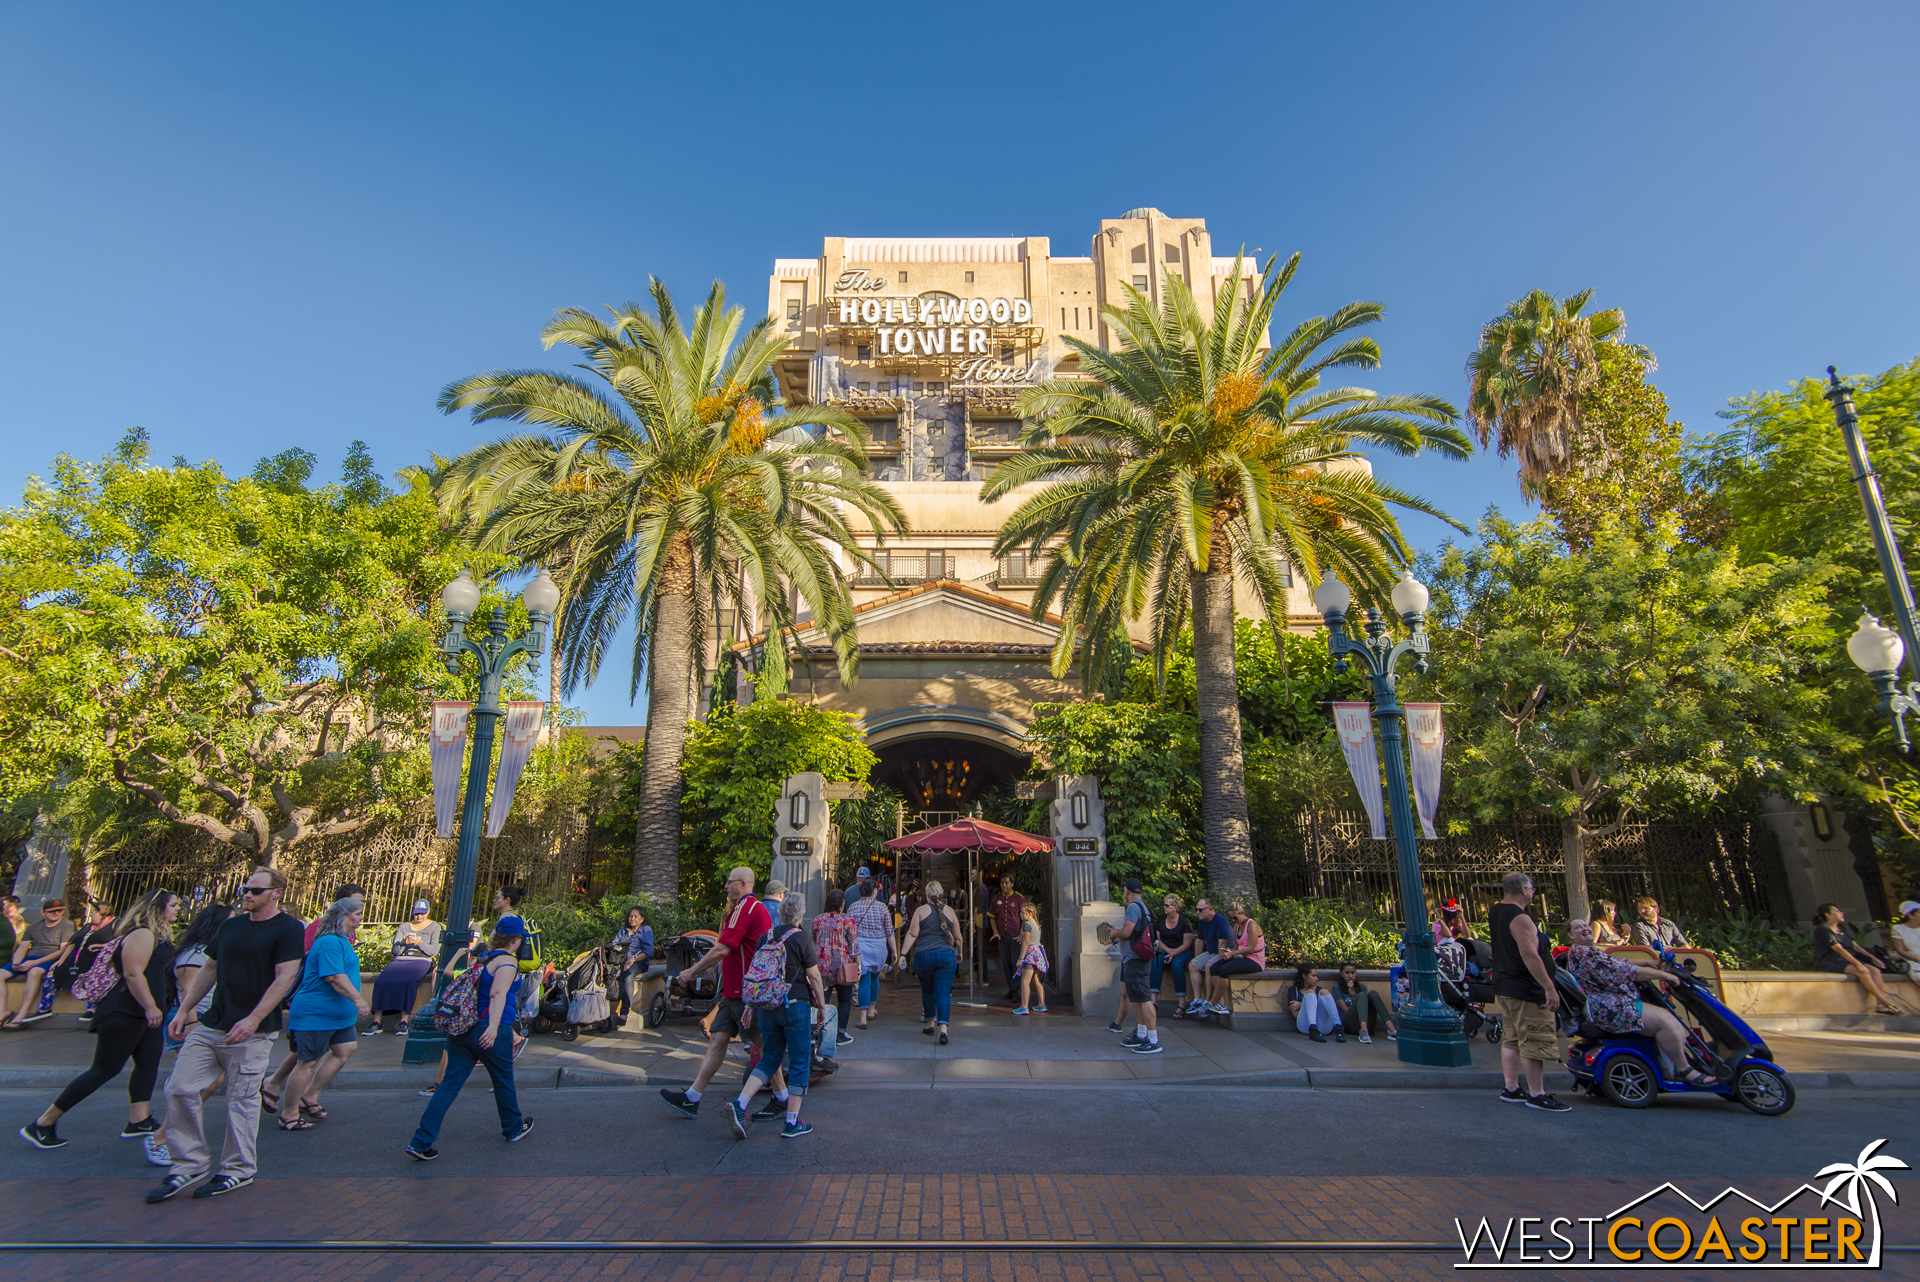  Tower of Terror will be shedding its art deco exterior. 